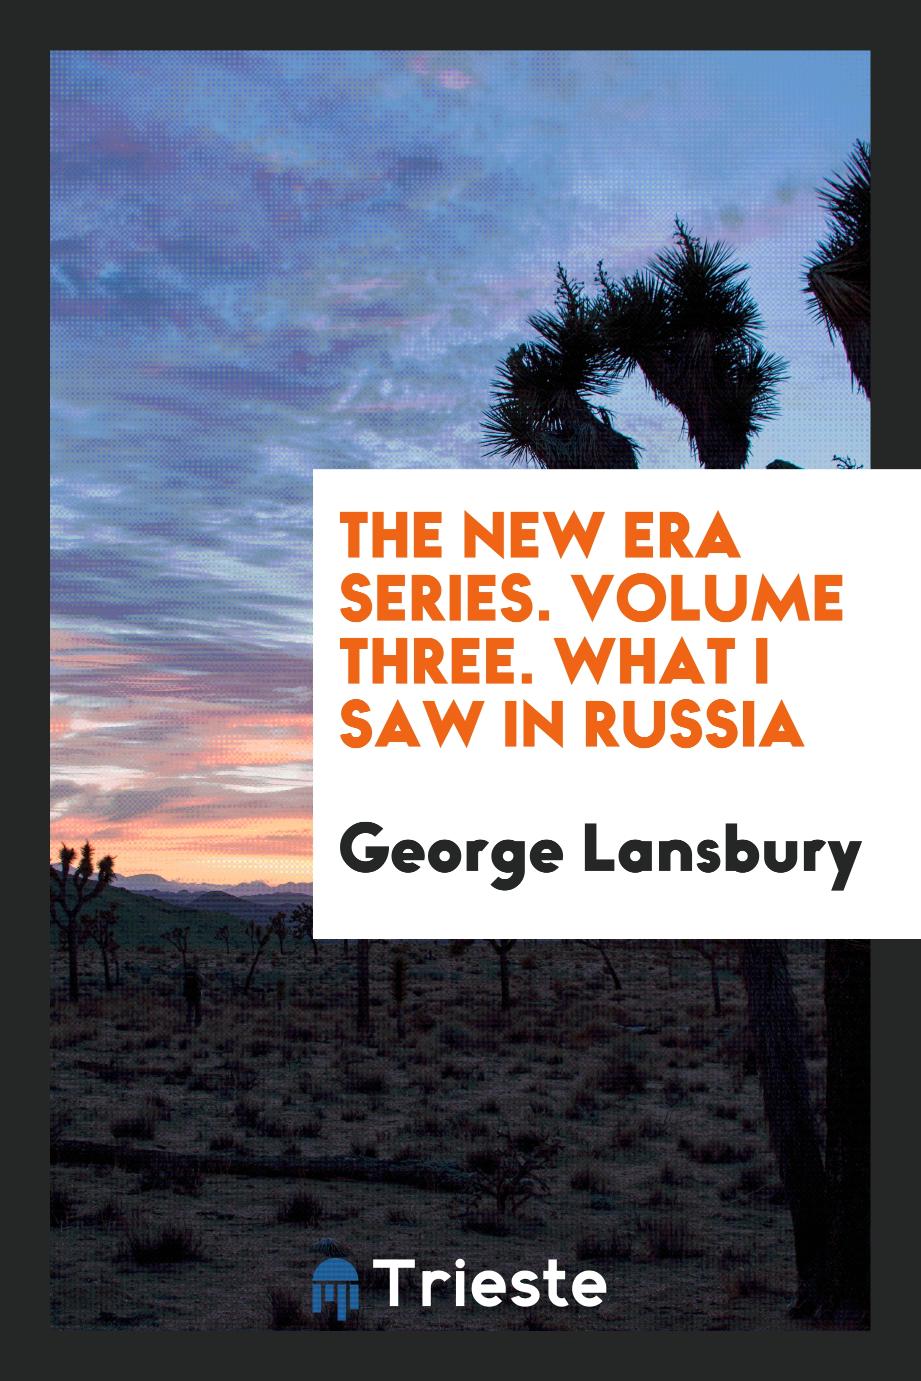 The New Era series. Volume three. What I saw in Russia